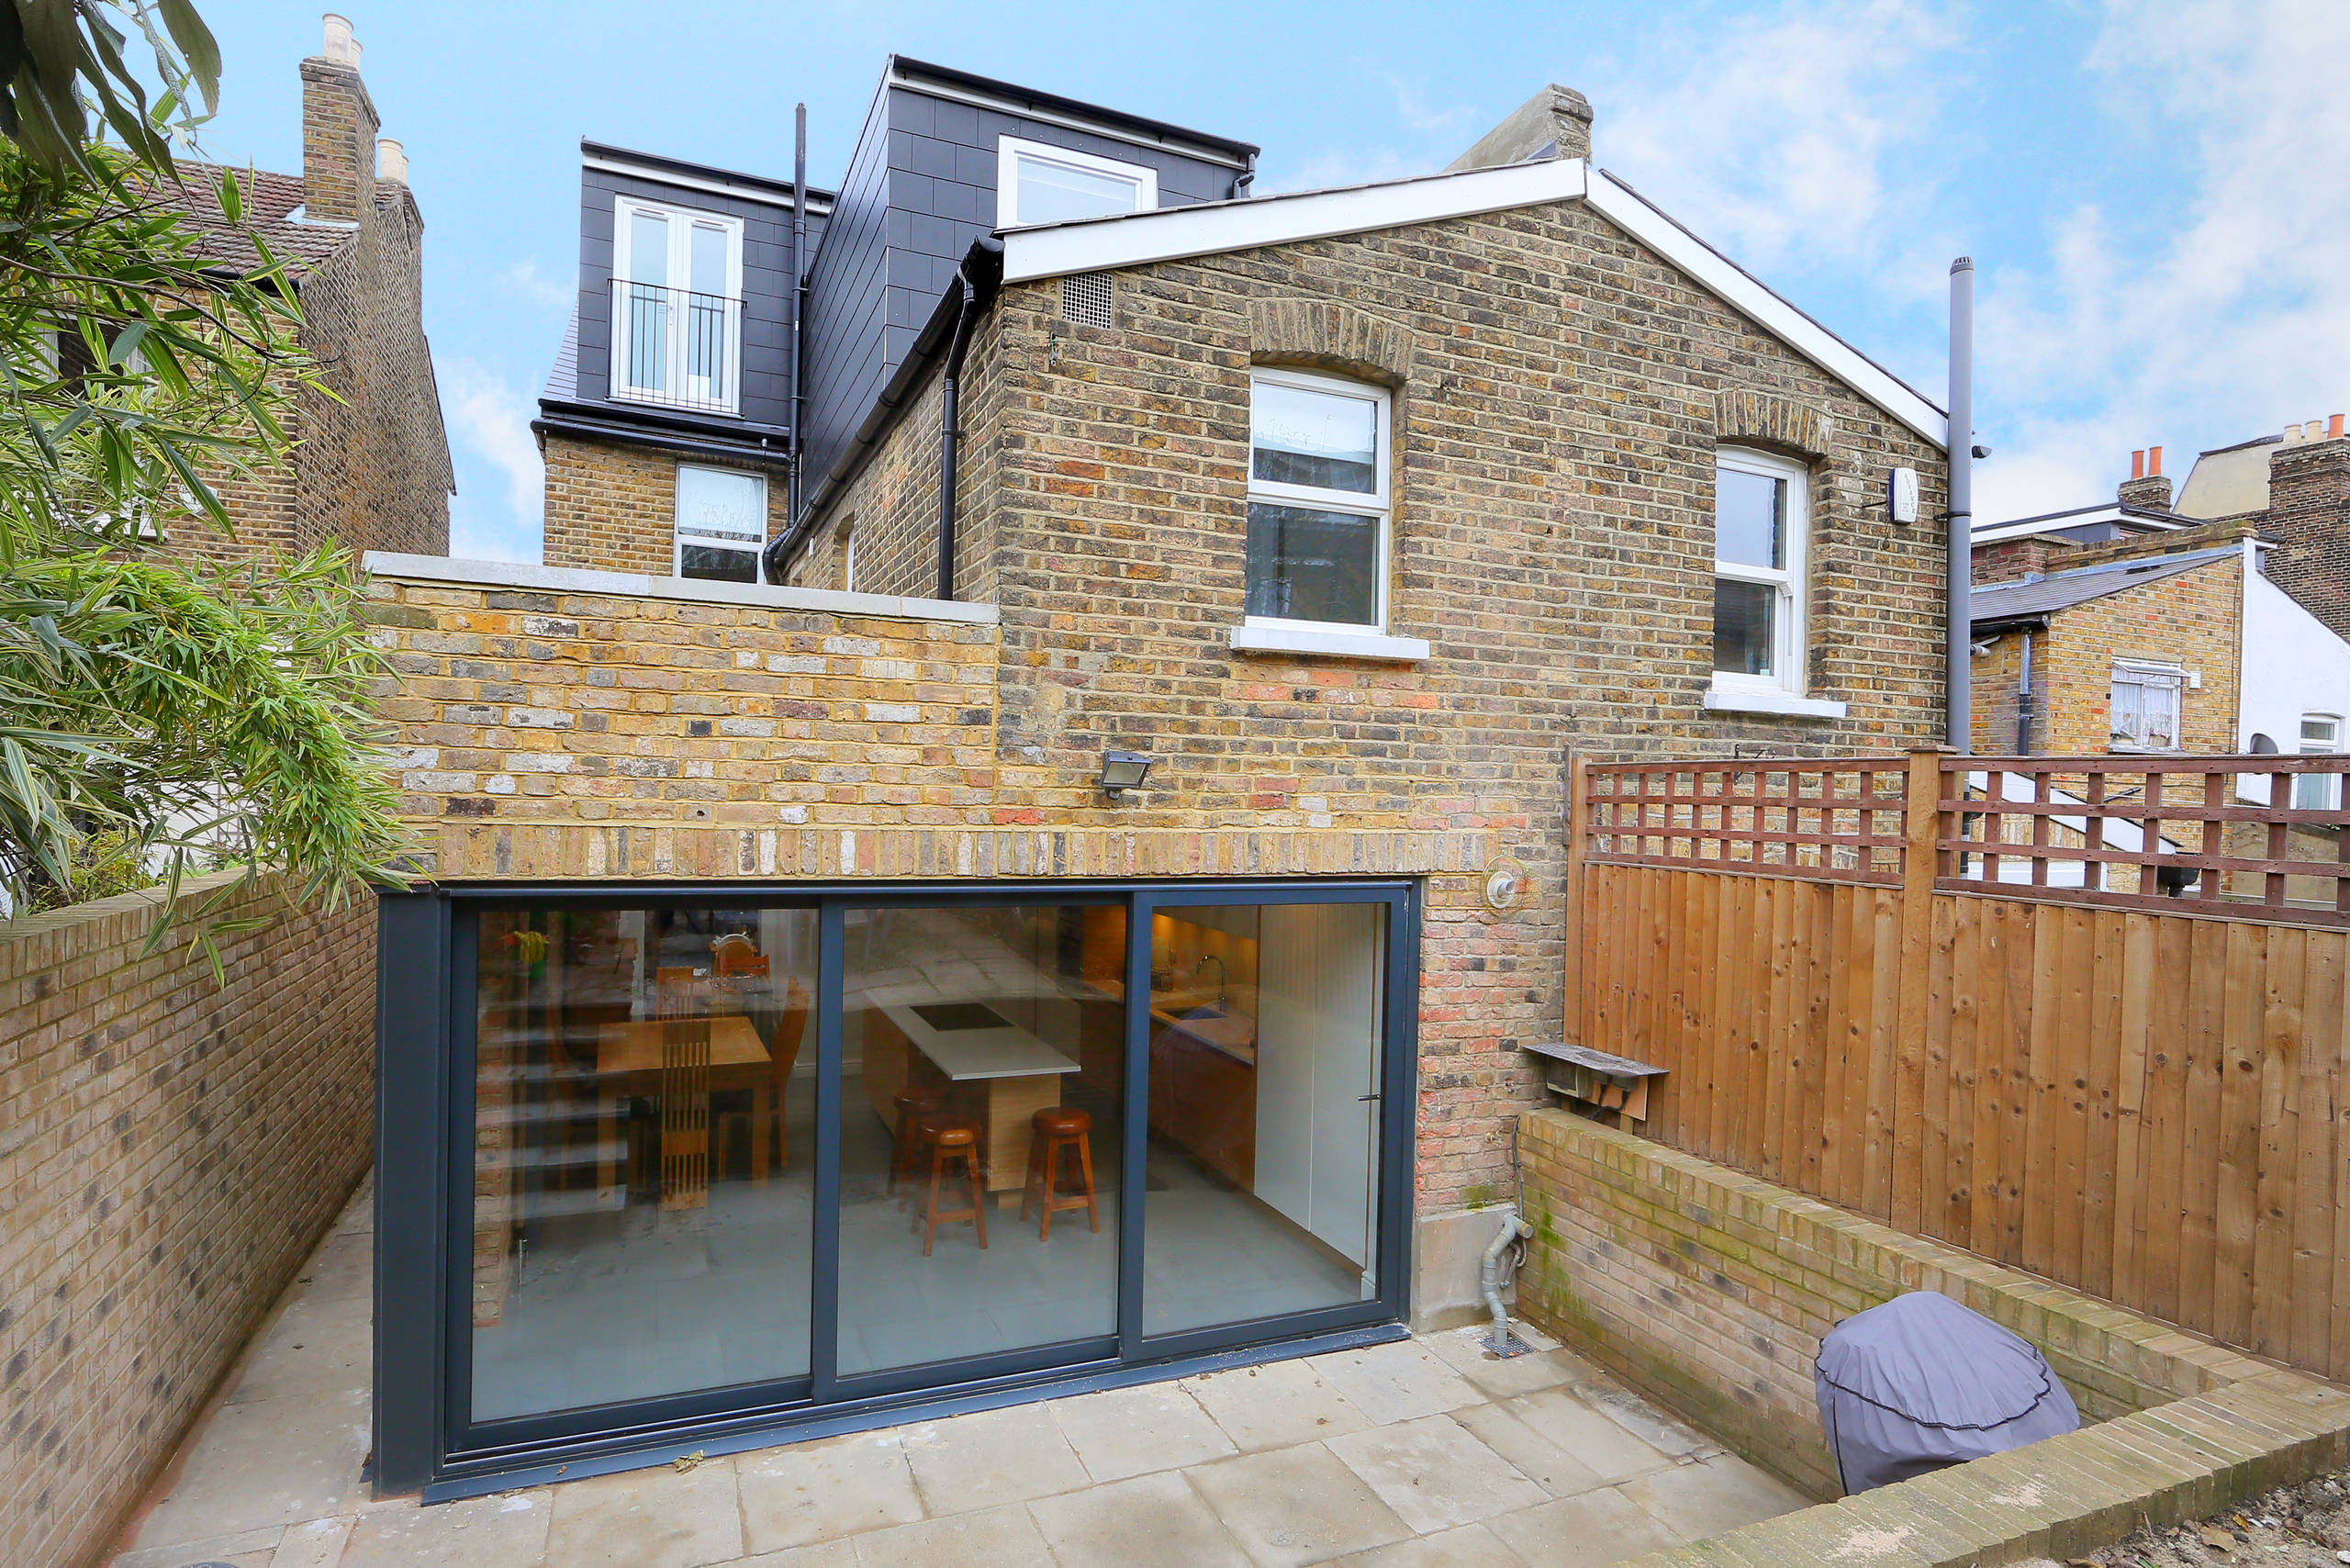 What You Need to Know About Dormer Loft Conversions | Houzz UK